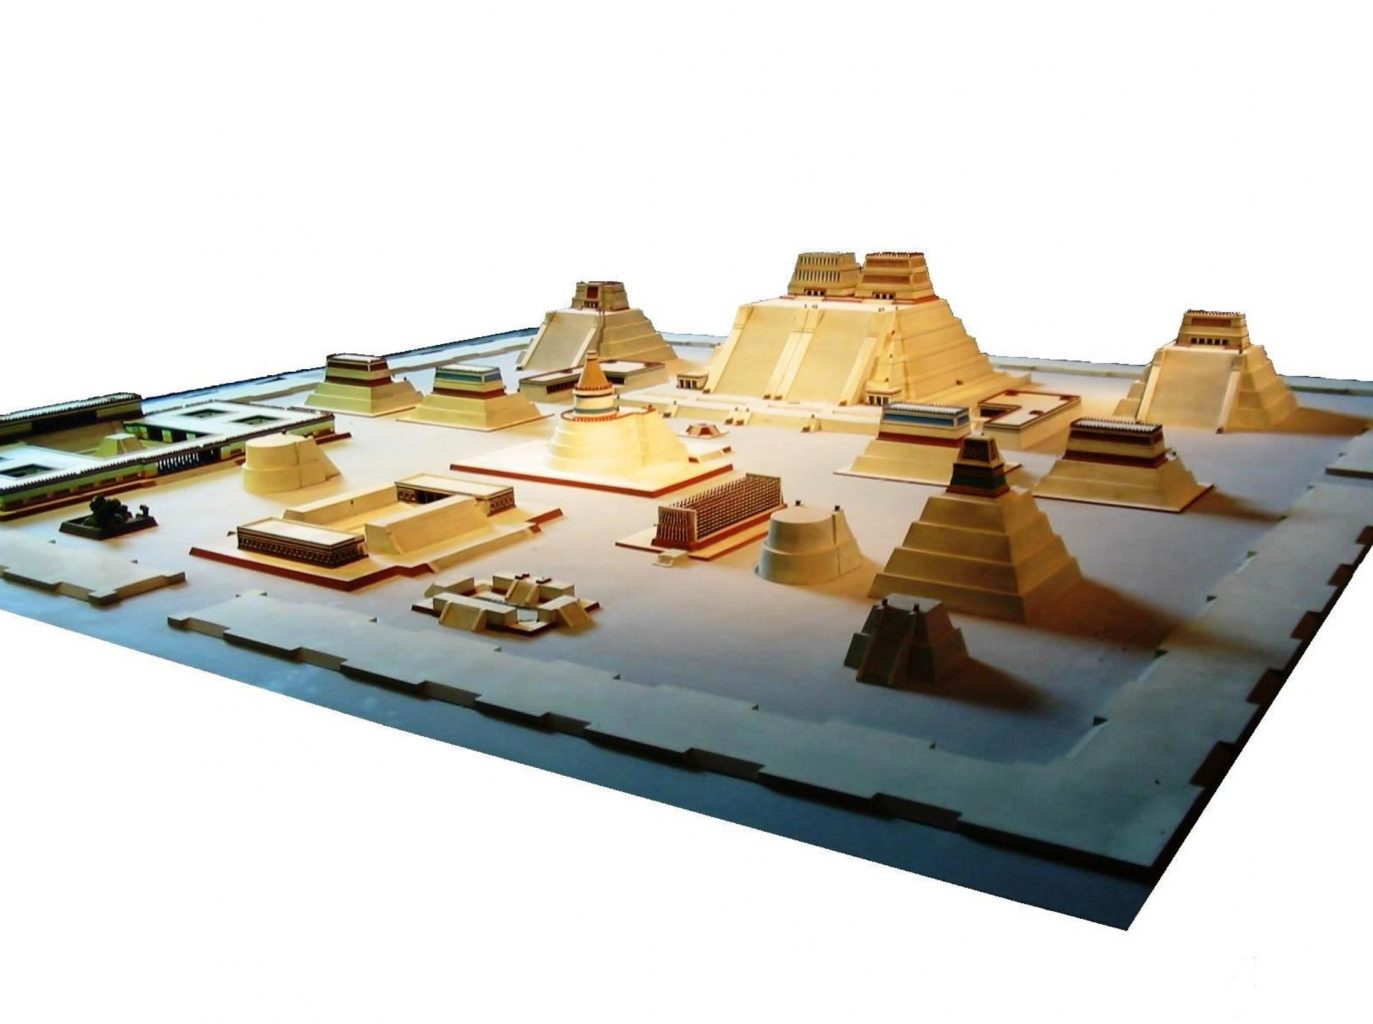 Model of the temple district of Tenochtitlan at the National Museum of Anthropology. Image Credit: Wikimedia Commons / Public Domain.